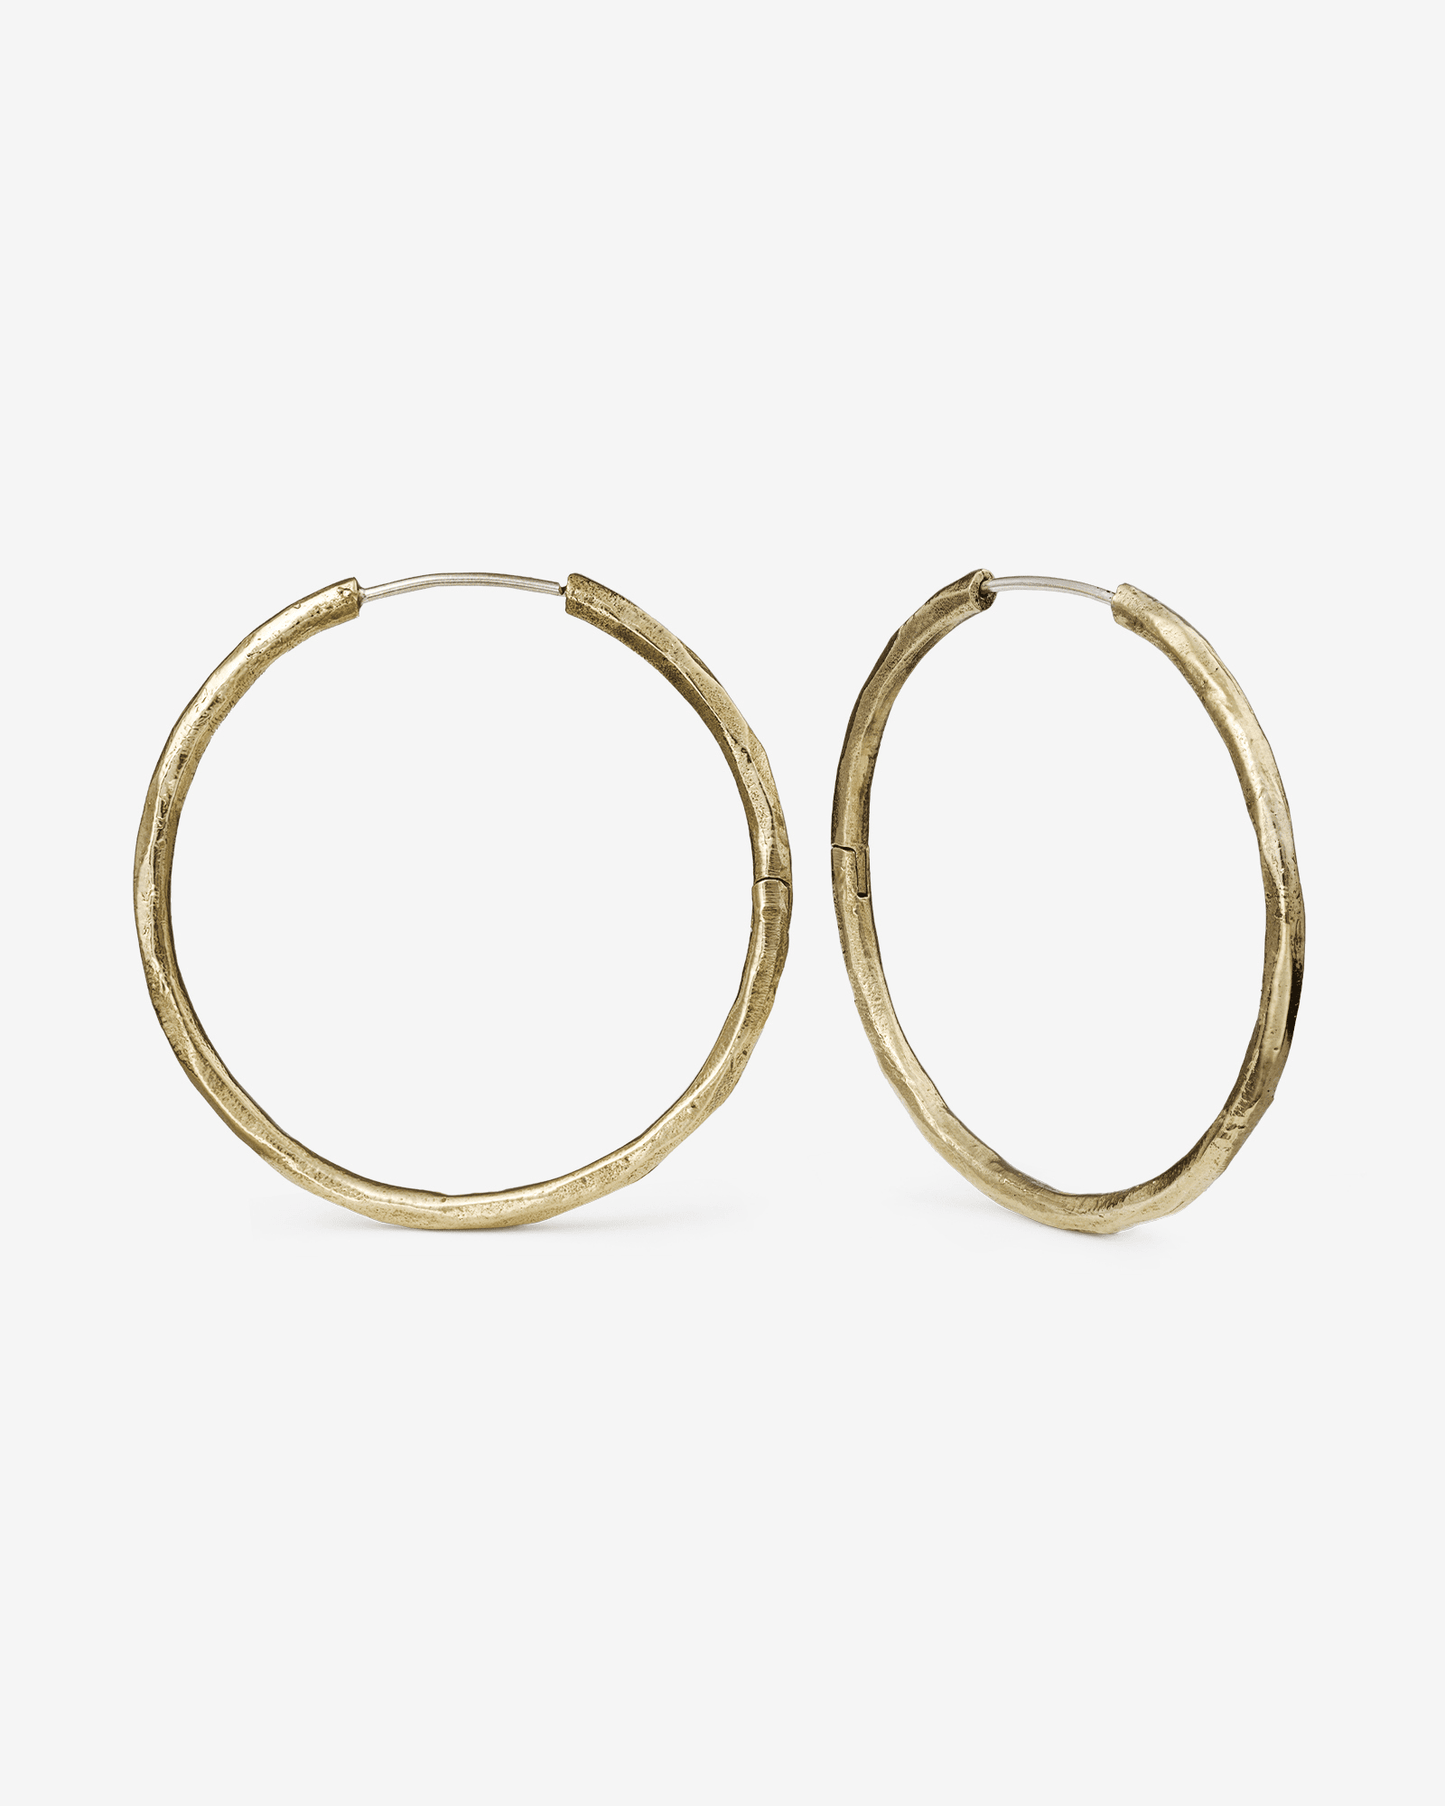 Synthesis Earrings No. 3